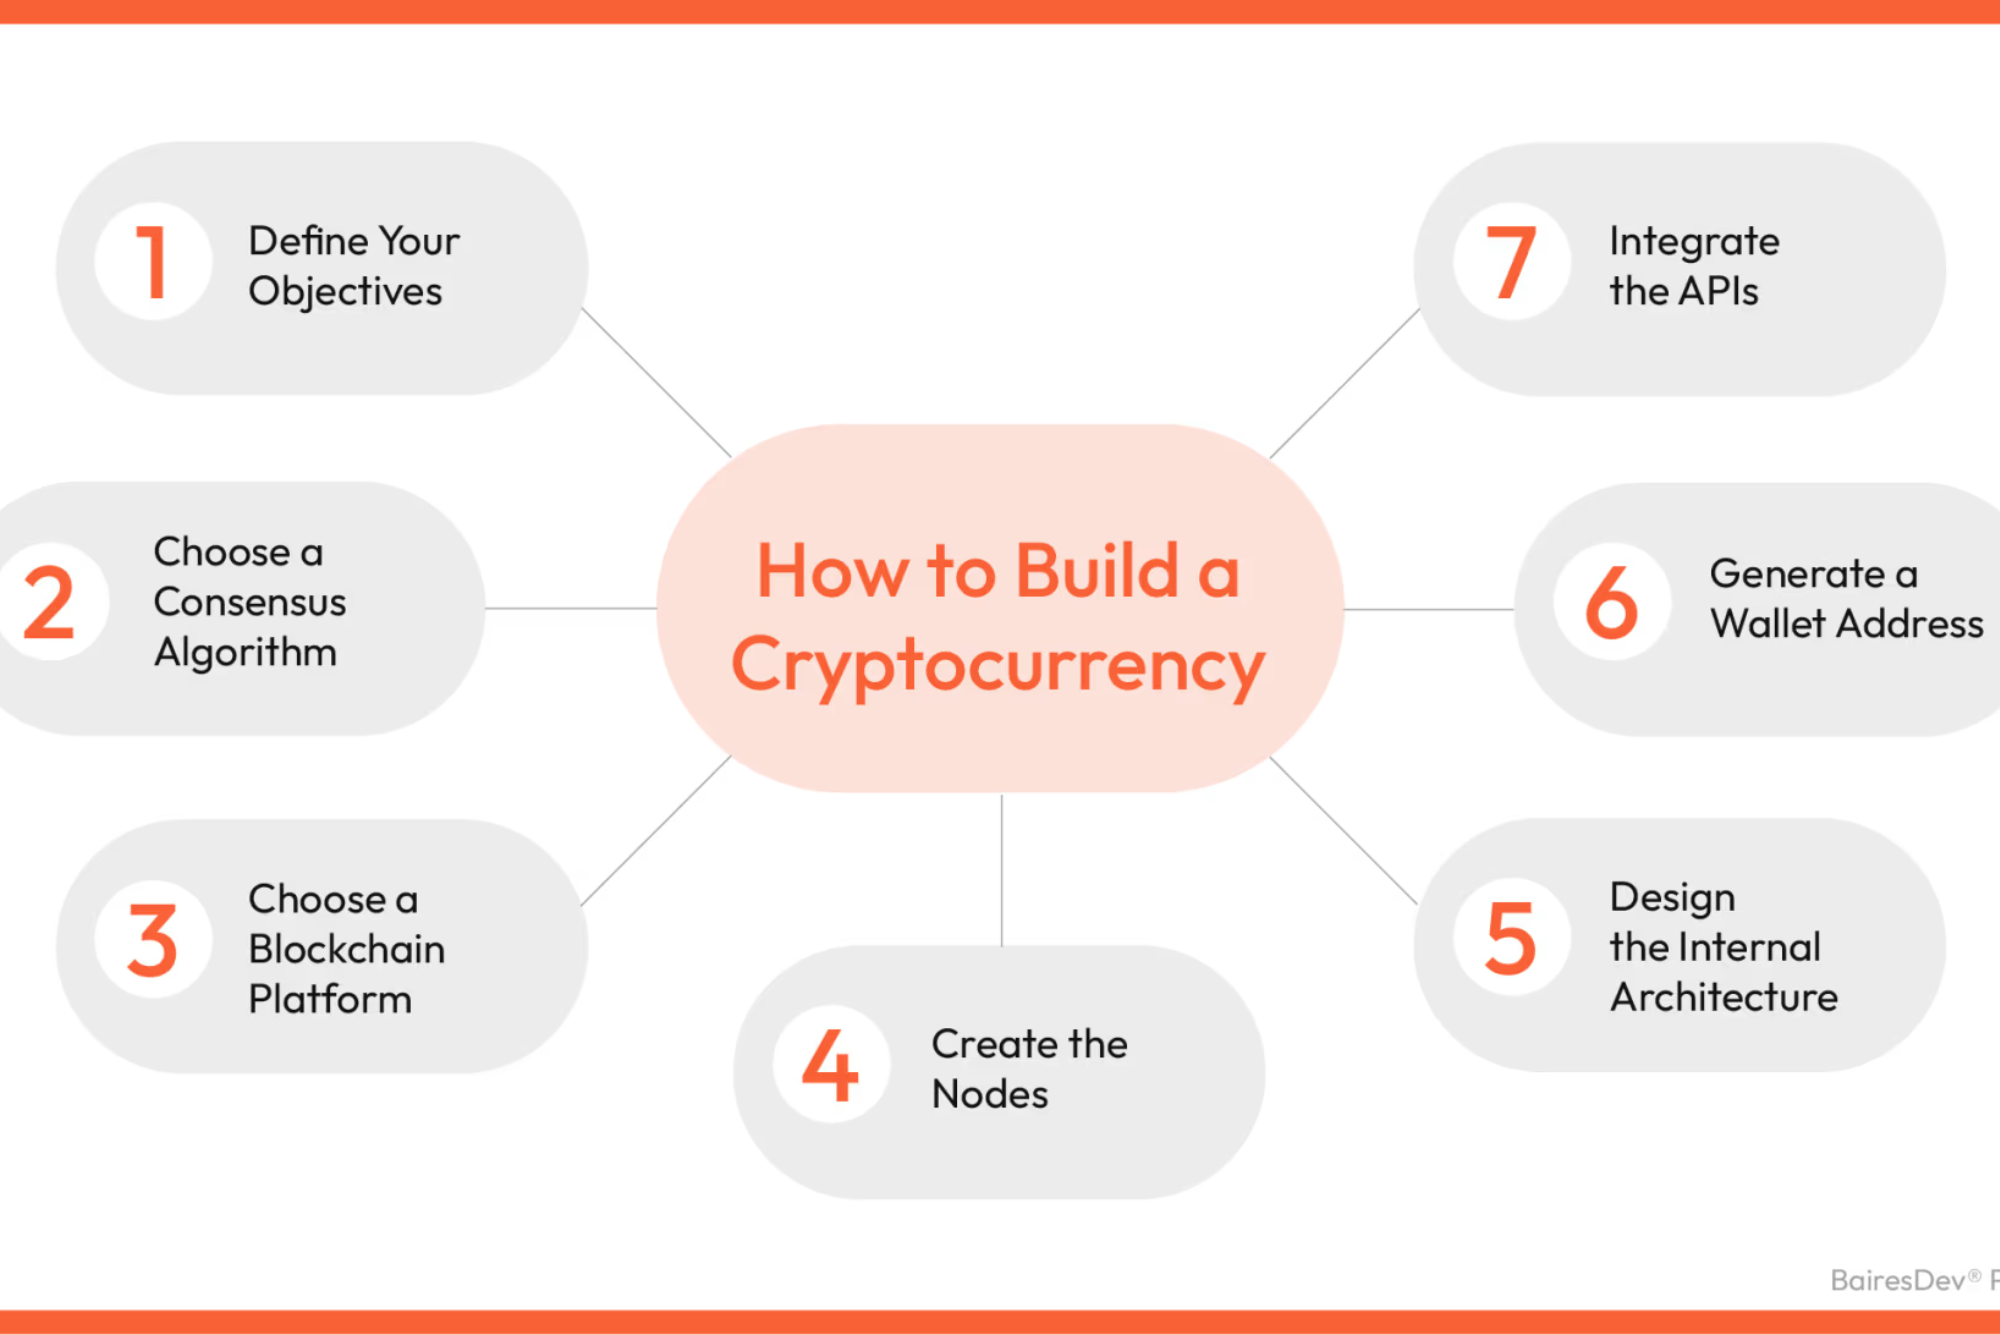 how to create your own cryptocurrency